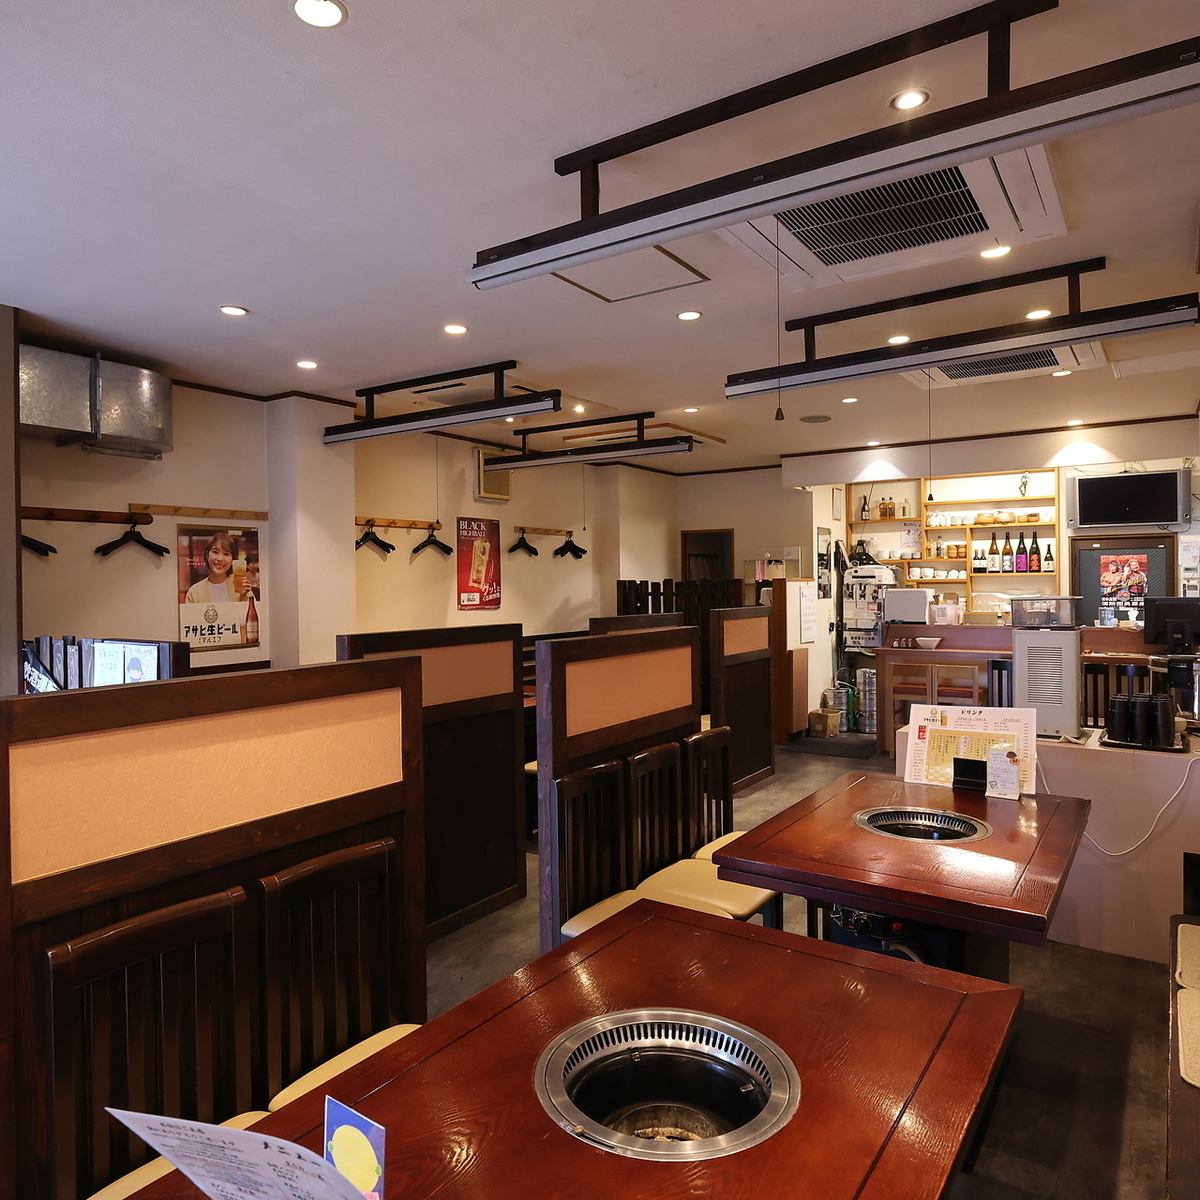 A Wagyu Yakiniku restaurant located in a residential area where you can relax and enjoy your time without straining your shoulders!